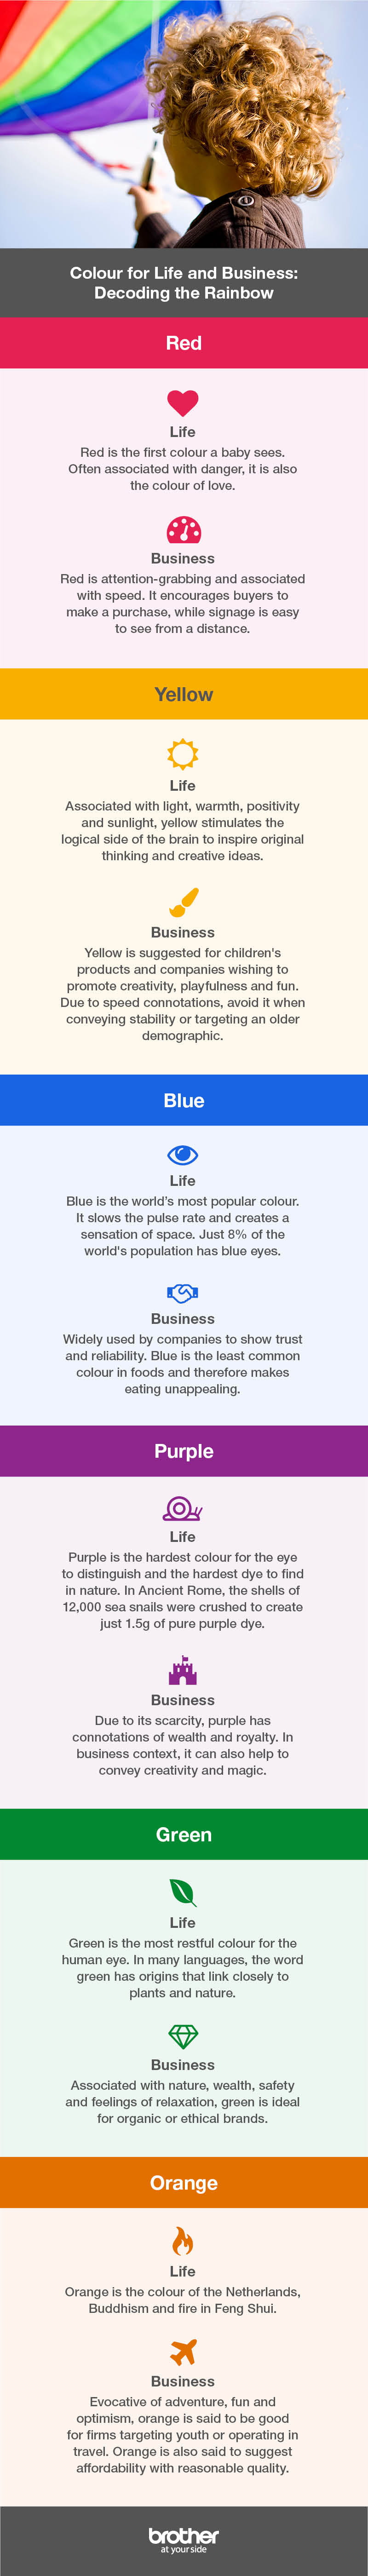 International Colour Day infographic containing facts about primary and secondary colours to help you decode the rainbow